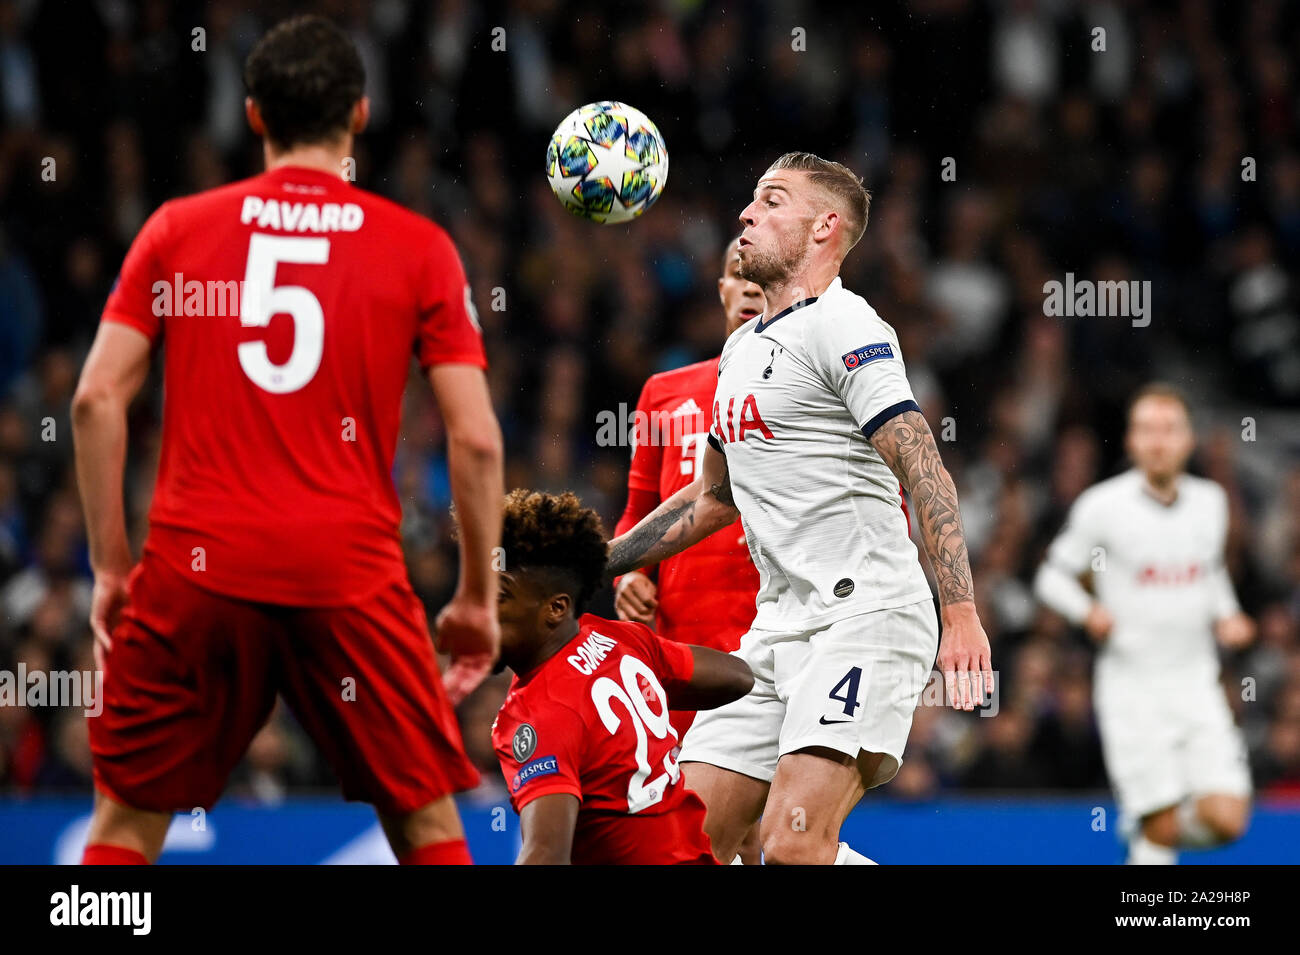 Toby Alderweireld from Tottenham Hotspur seen in action during the UEFA Champions League (Group B) match between Tottenham Hotspur and Bayern Munich.(Final score; Tottenham Hotspur 2:7 Bayern Munich) Stock Photo